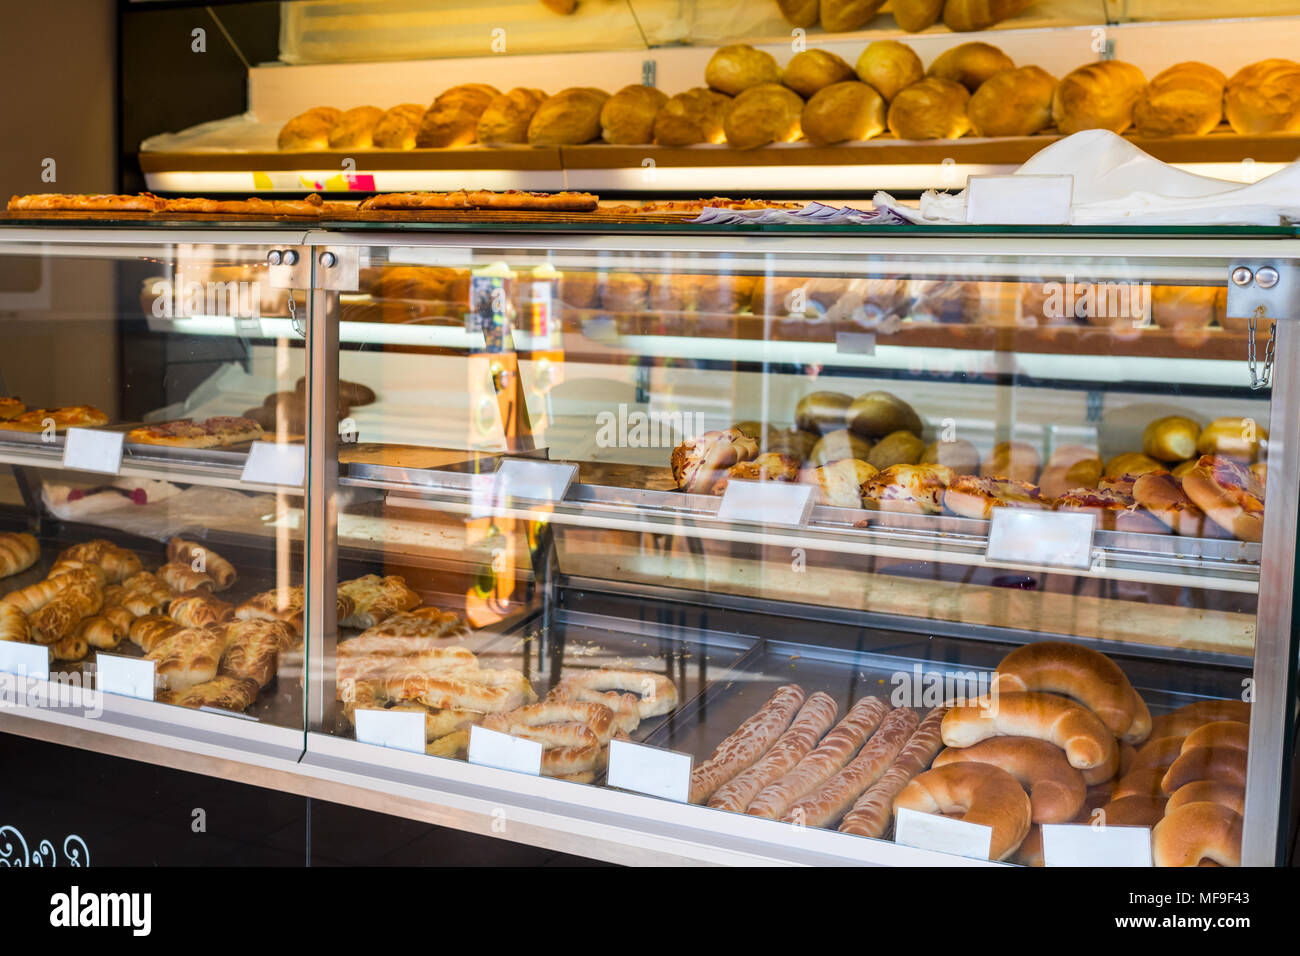 glass shelves with fresh bread and buns Stock Photo